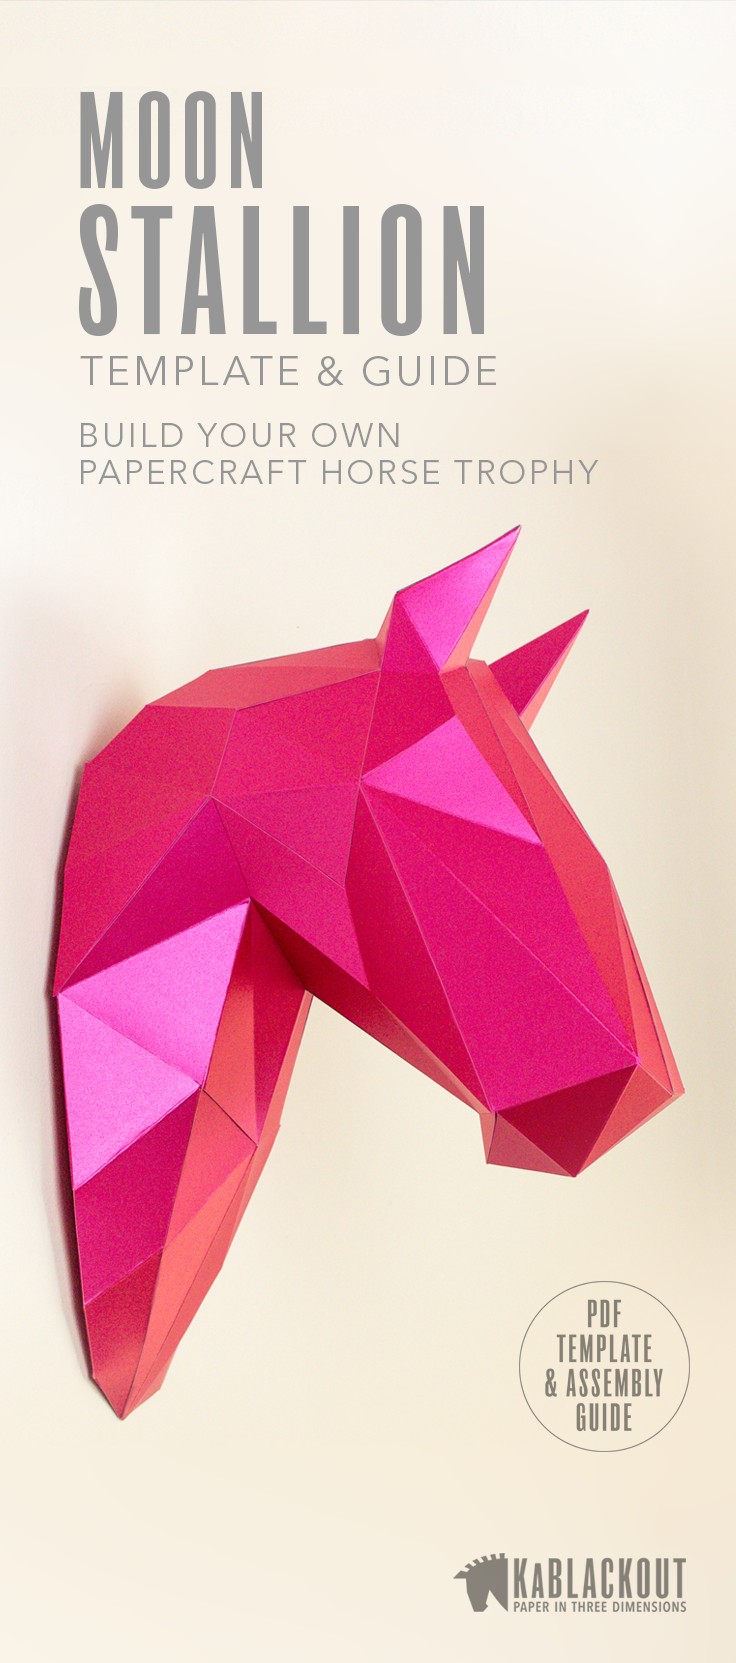 Papercraft Head Horse Papercraft Diy Horse Template Low Poly Horse 3d Wall Trophy